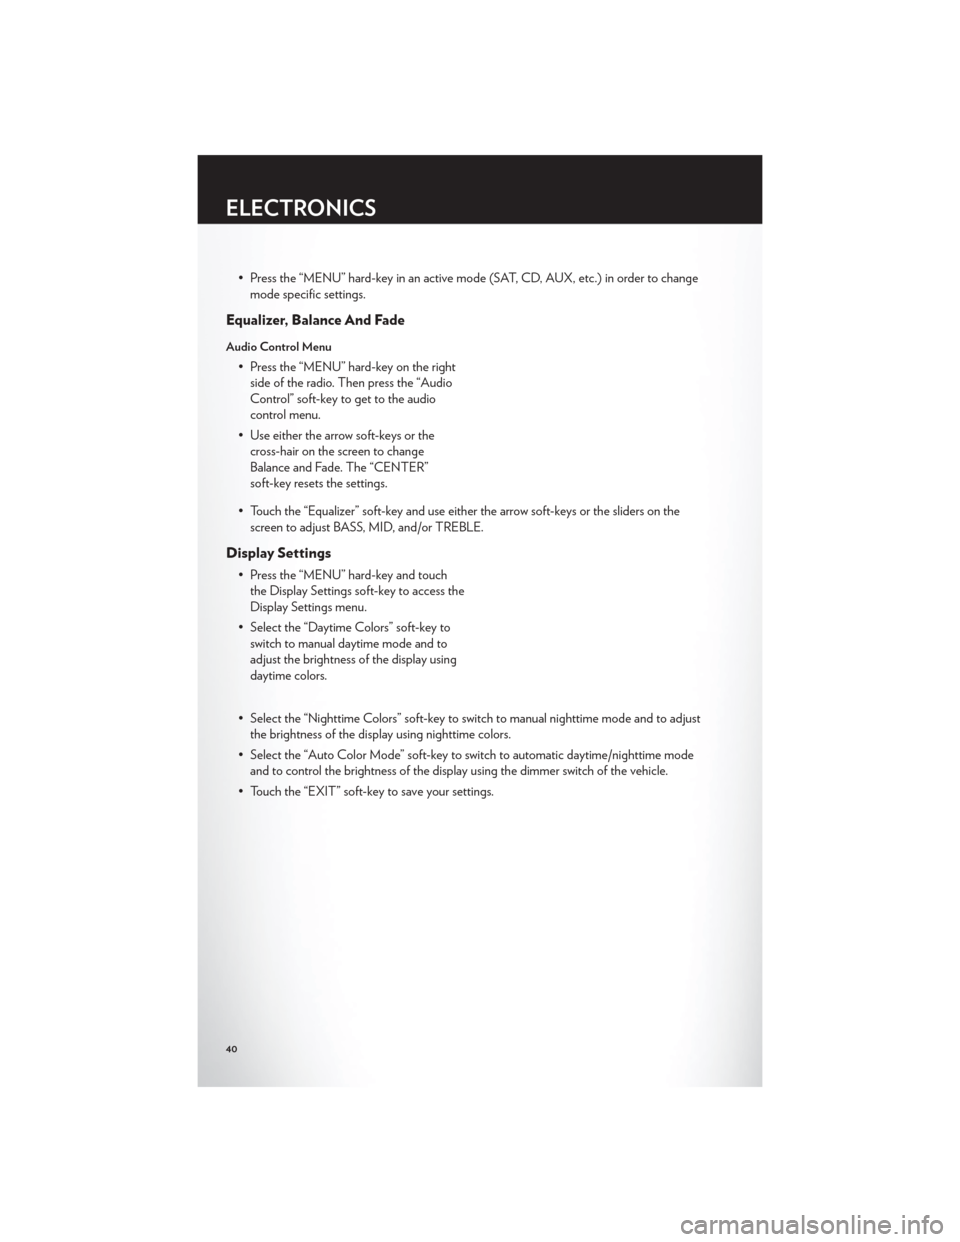 CHRYSLER 200 2012 1.G Service Manual • Press the “MENU” hard-key in an active mode (SAT, CD, AUX, etc.) in order to changemode specific settings.
Equalizer, Balance And Fade
Audio Control Menu
• Press the “MENU” hard-key on t